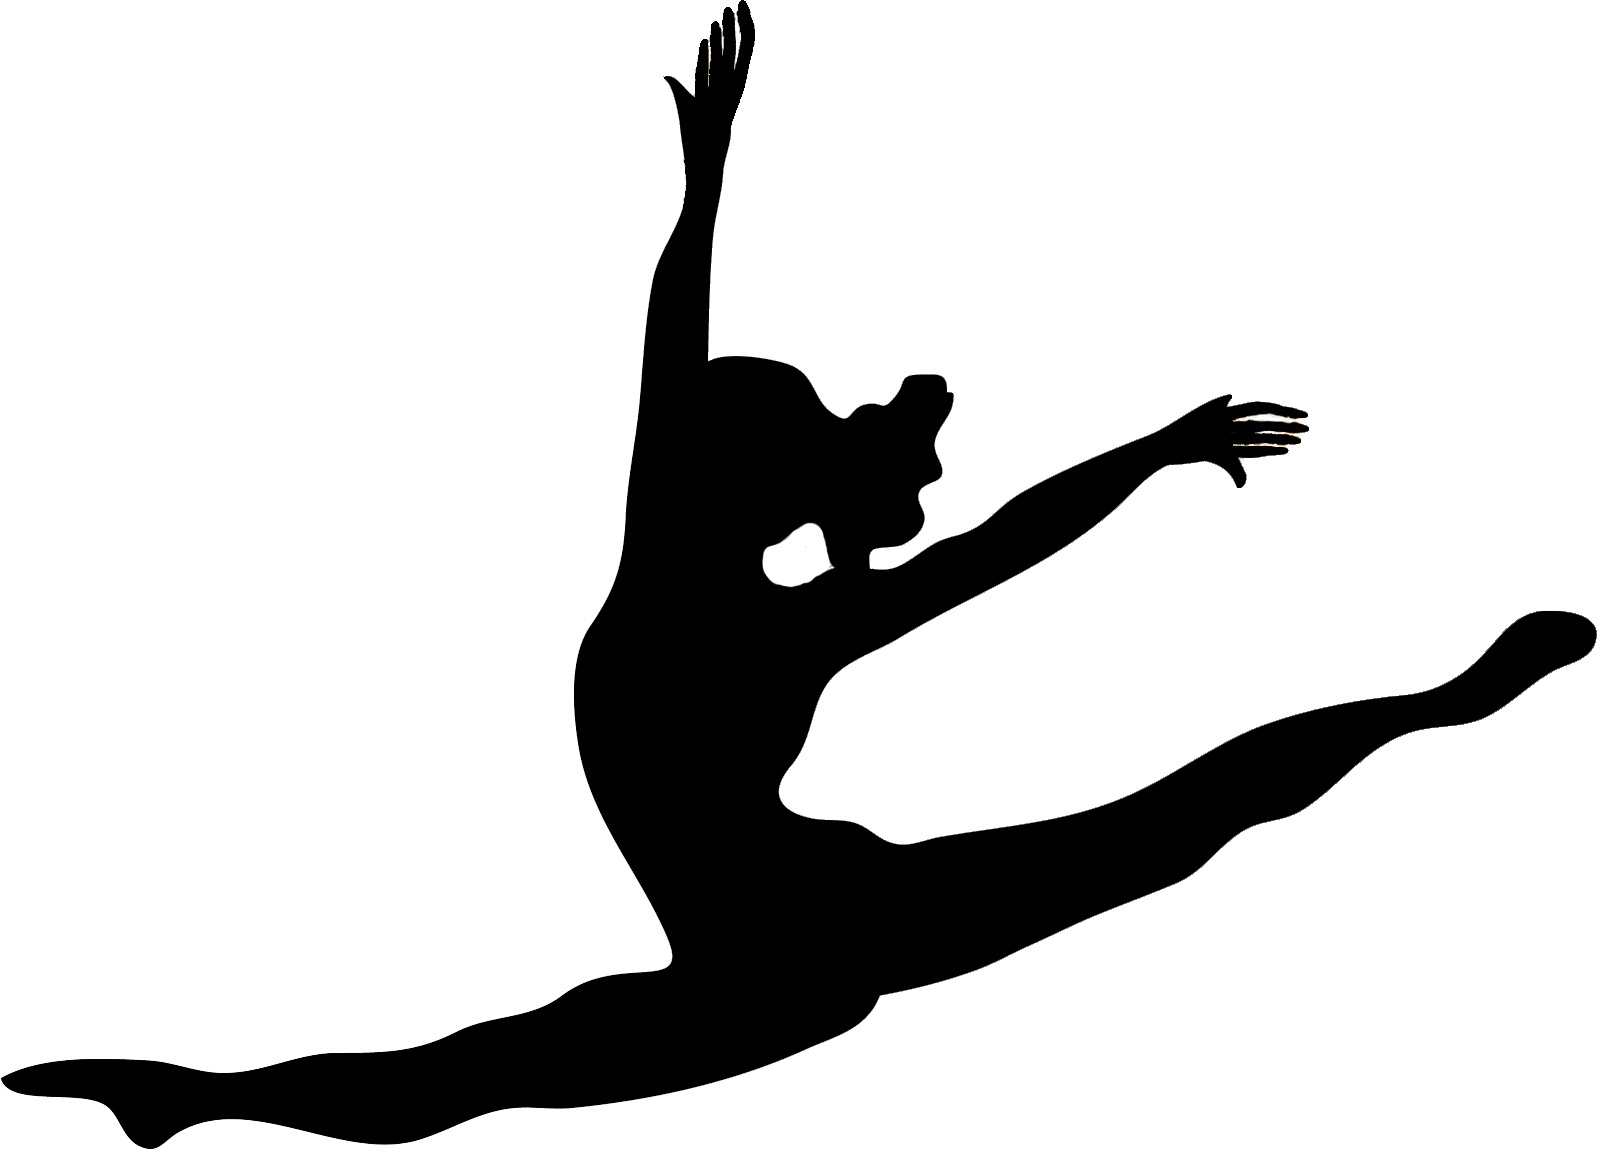 Clipart Toe Touch Displaying 20 Images For Cheerleading Clipart Toe